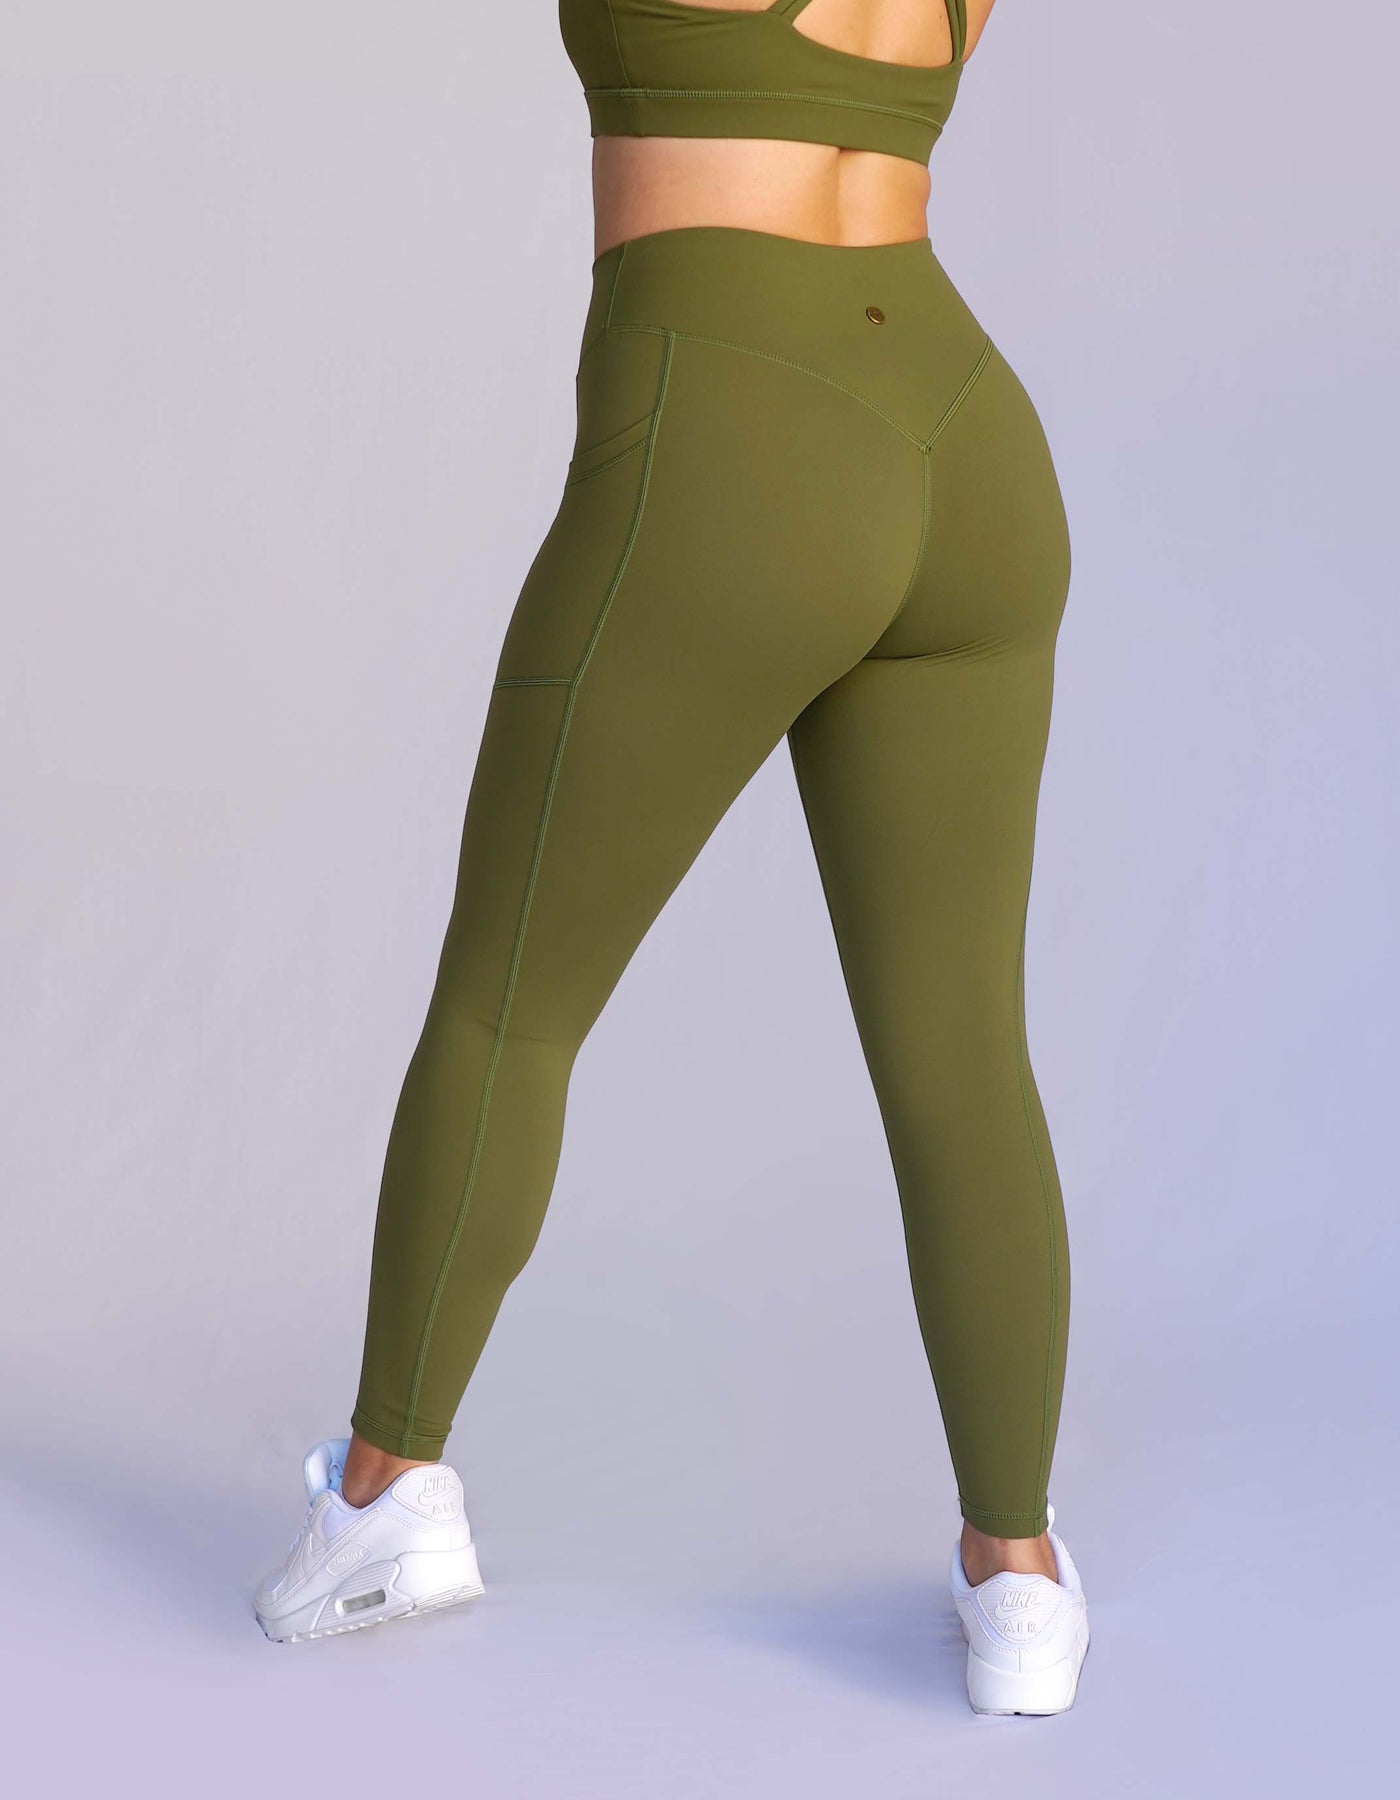 BuffBunny Stretch Active Pants, Tights & Leggings